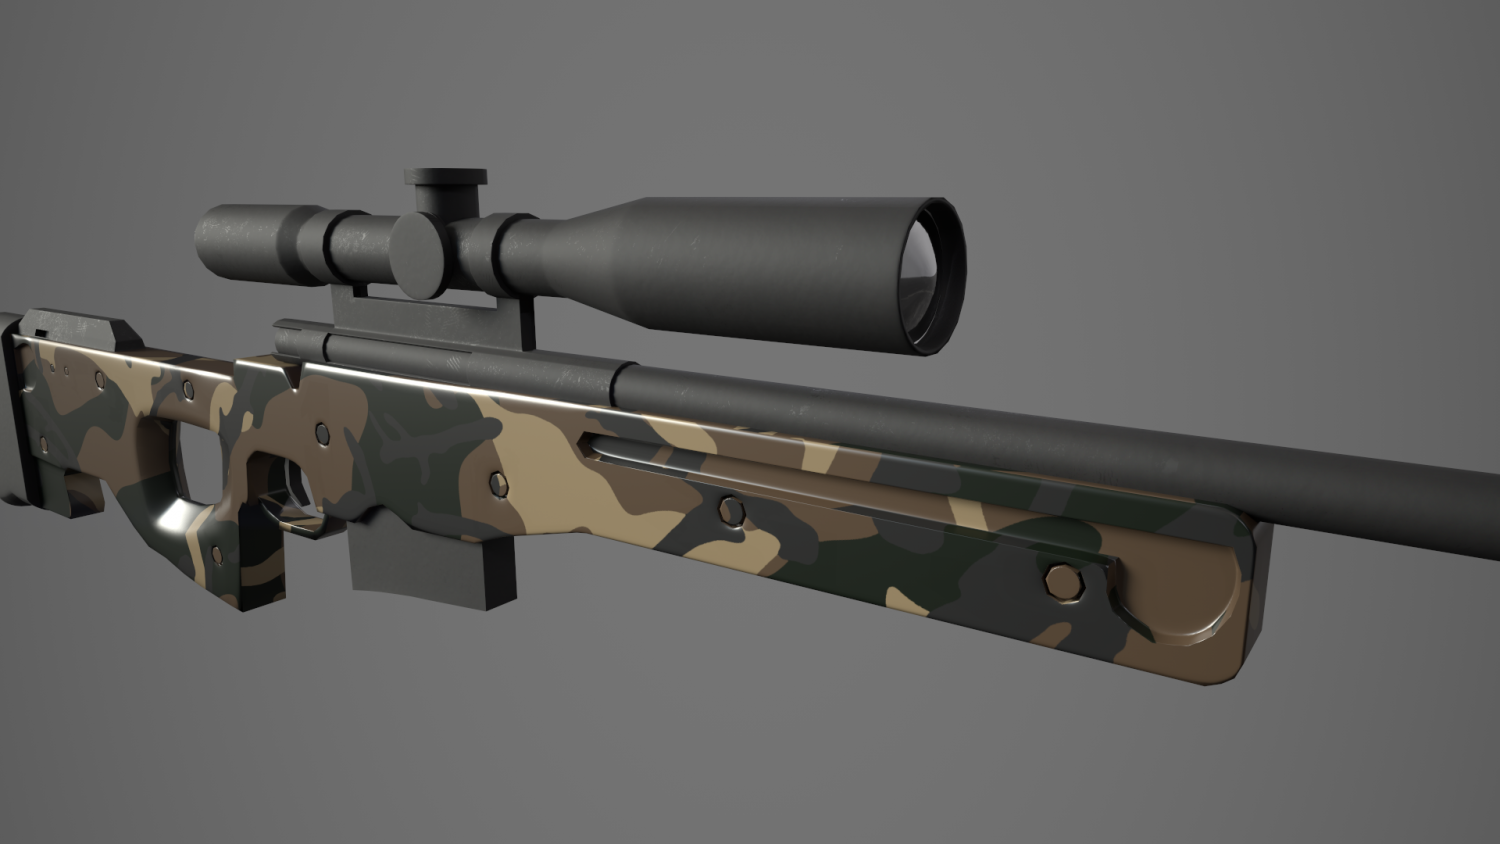 Awp cannons kg v4 мастерская фото 71